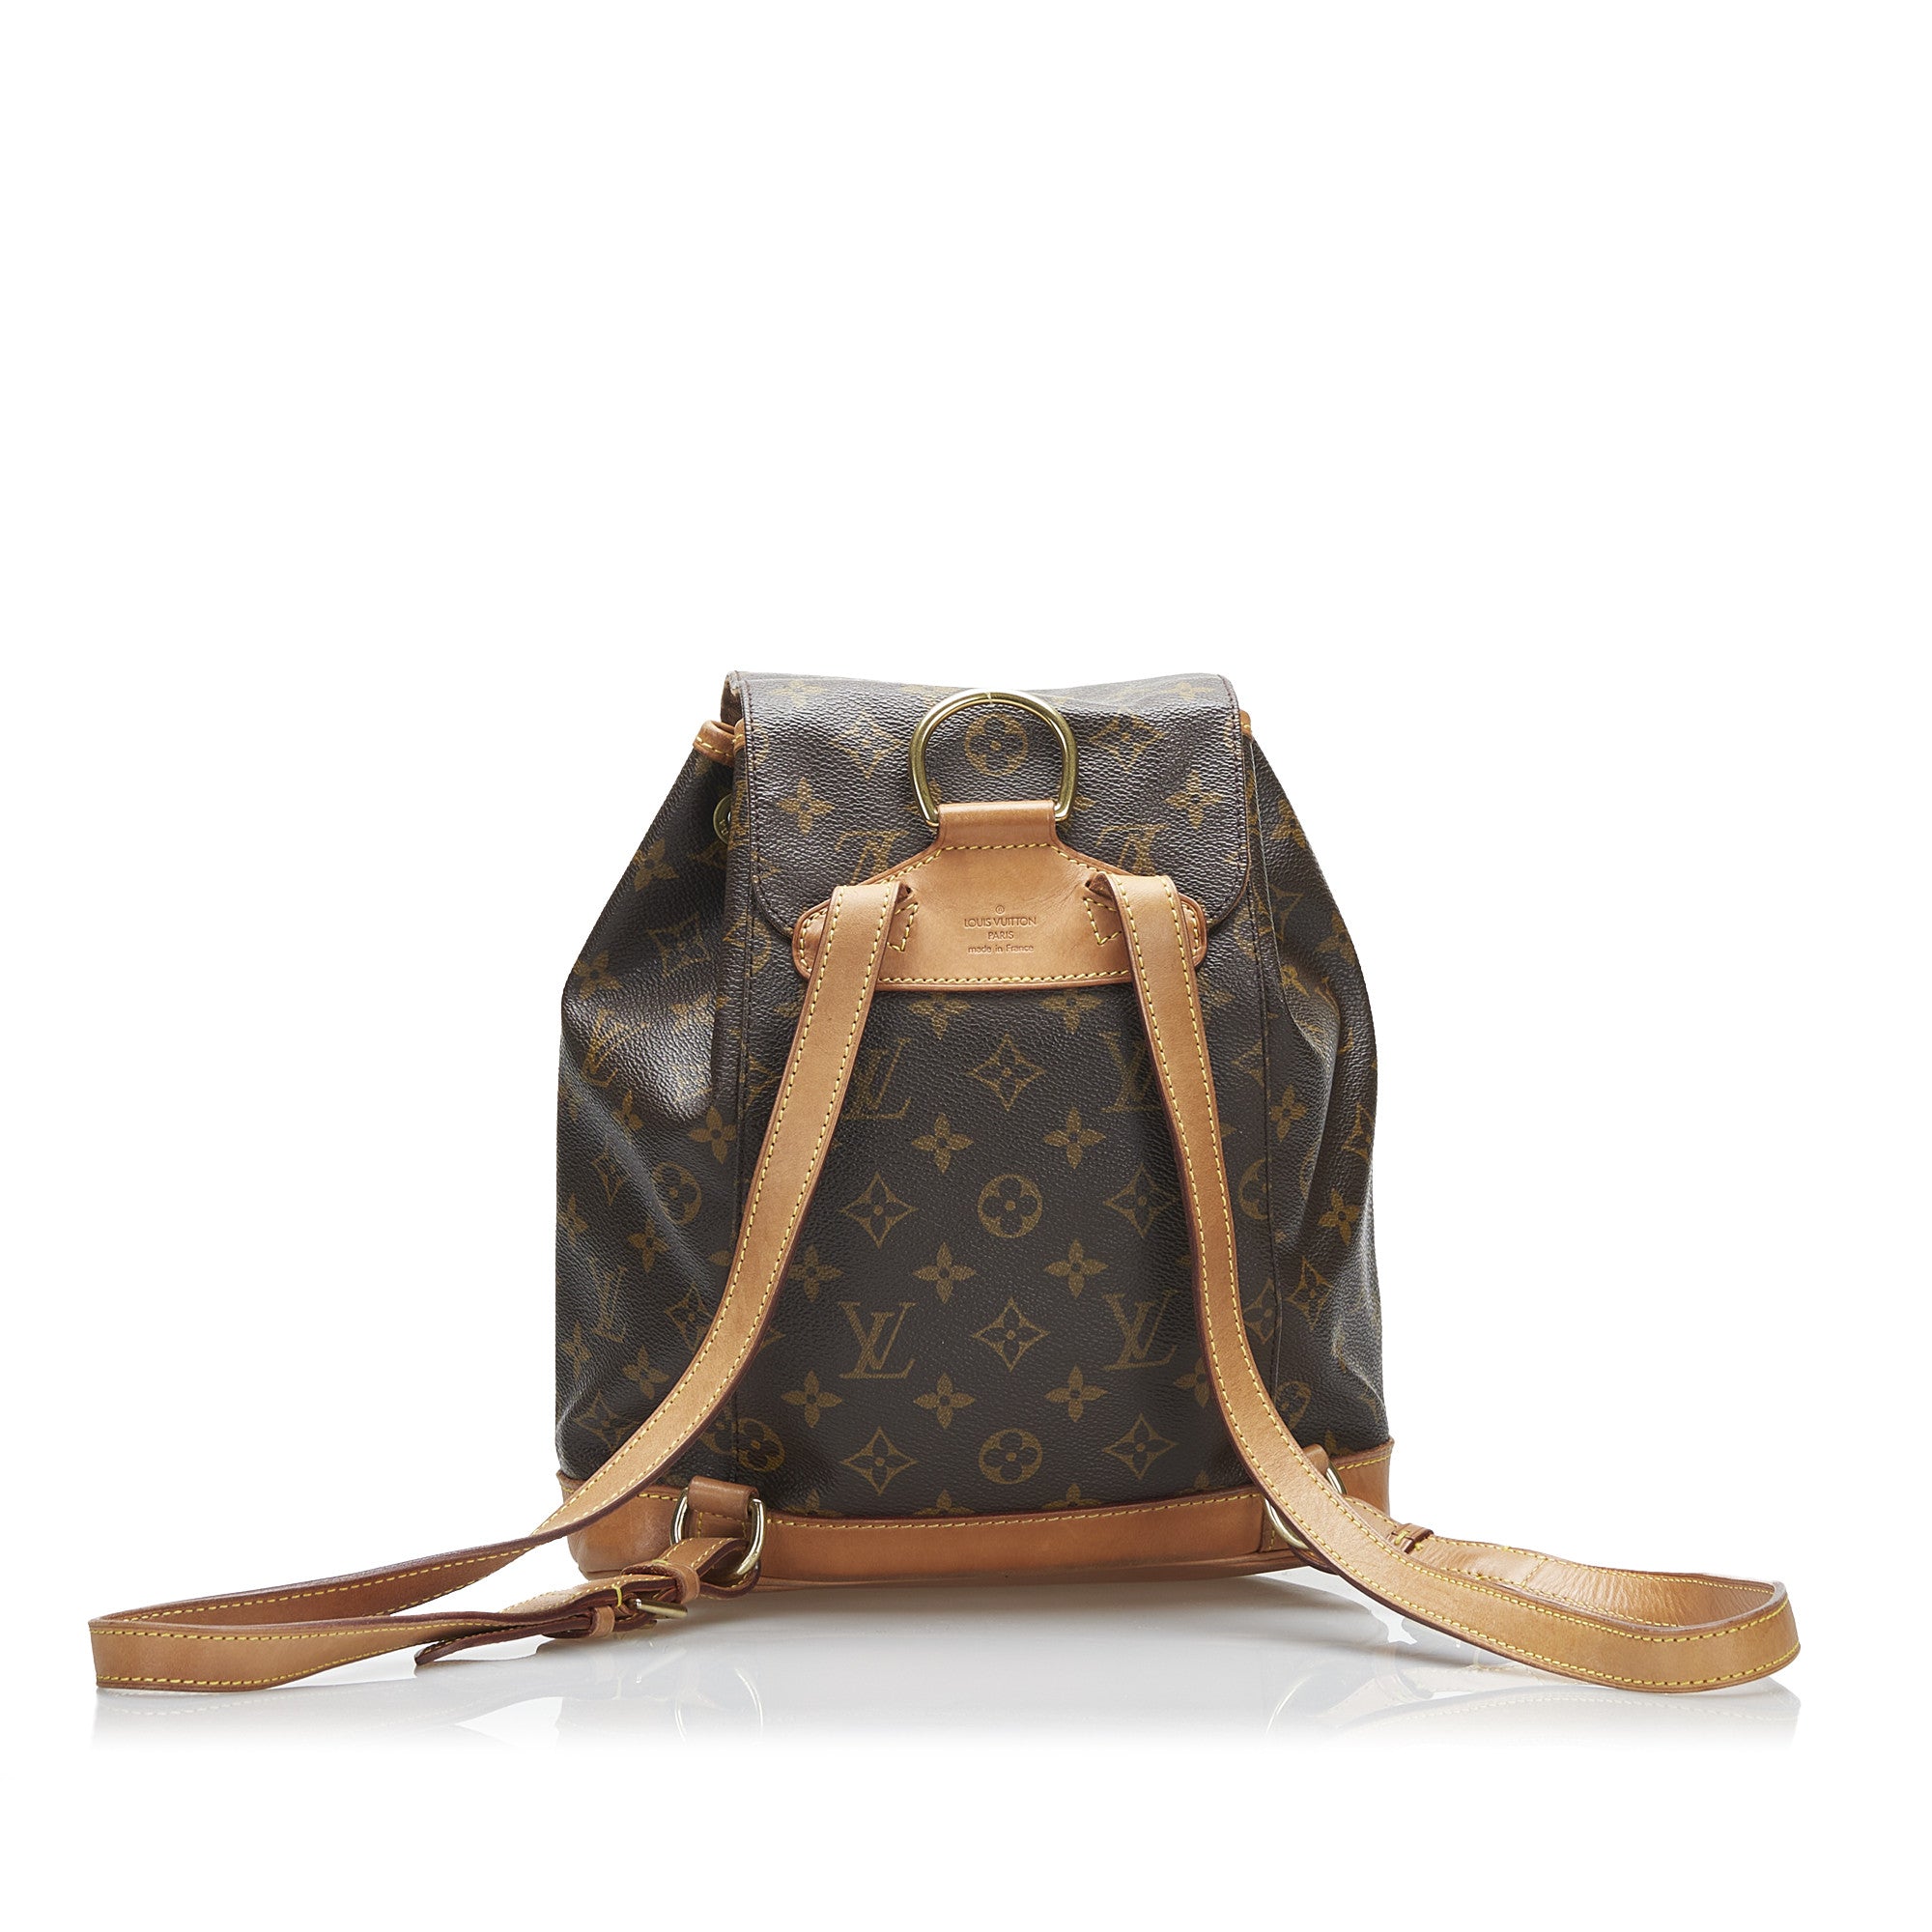 Louis Vuitton Montsouris Brown Gold Plated Backpack Bag (Pre-Owned)